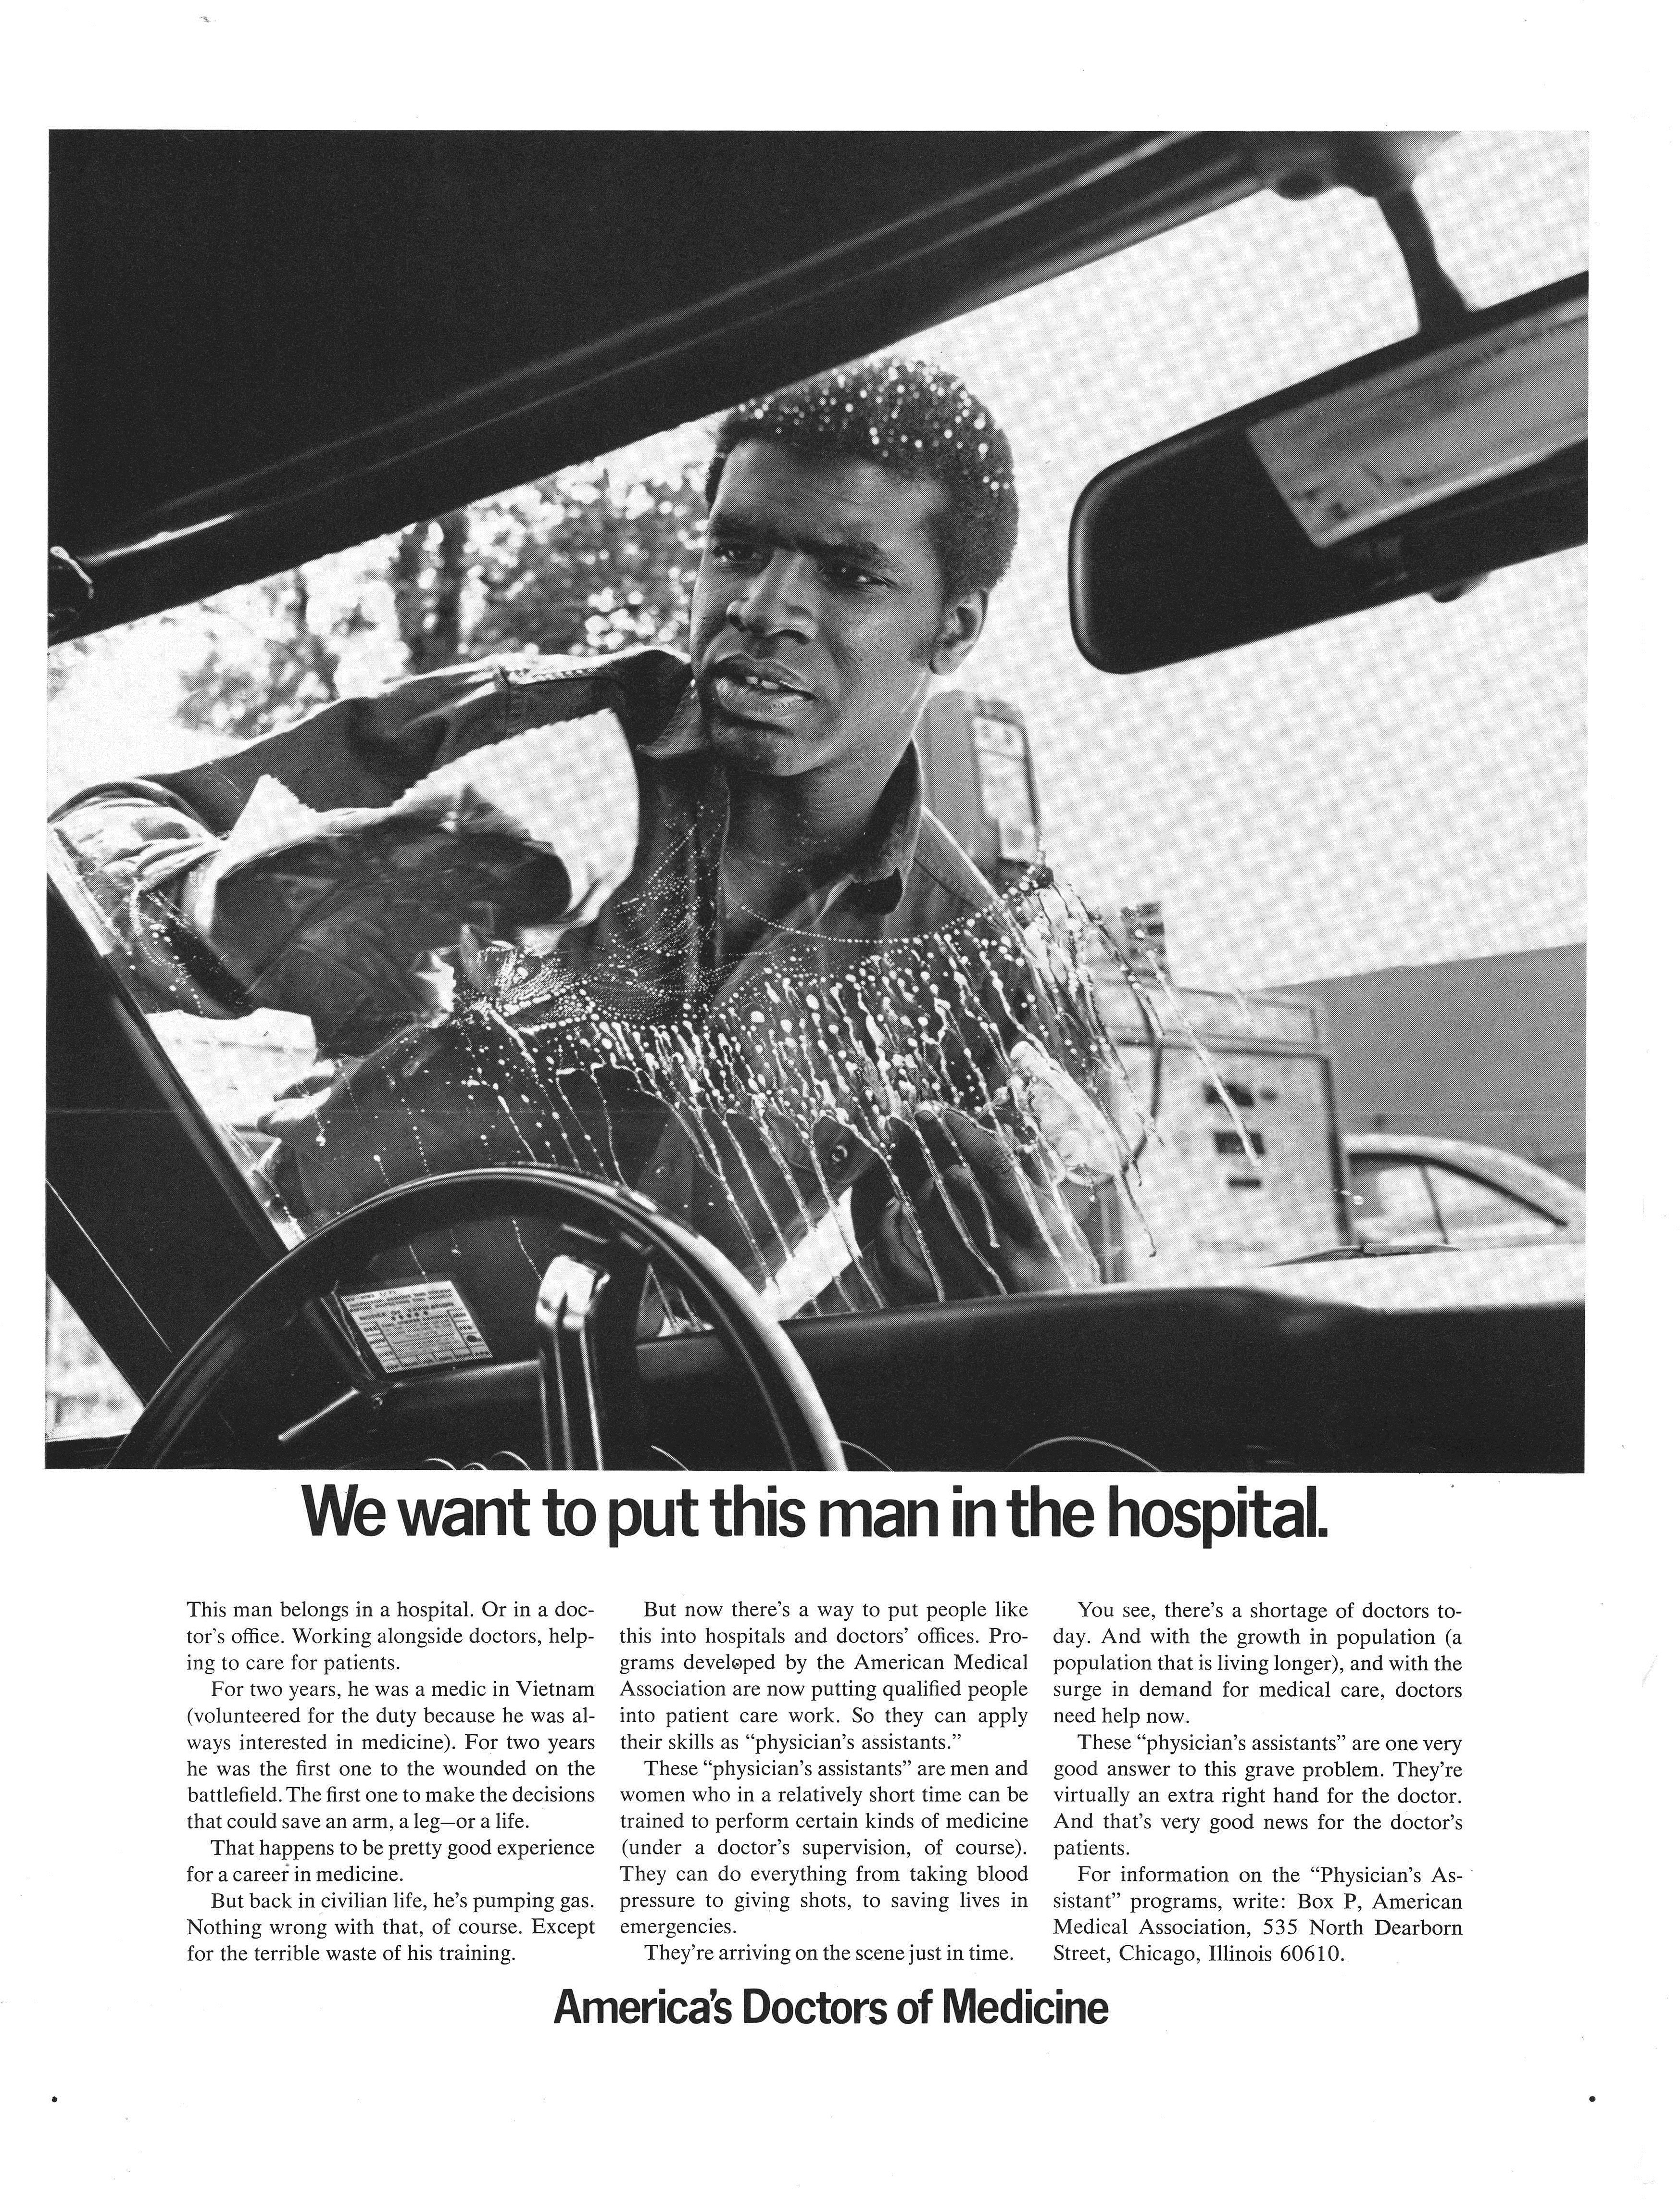 PH-S01-01760.05_put-this-man-in-the-hospital